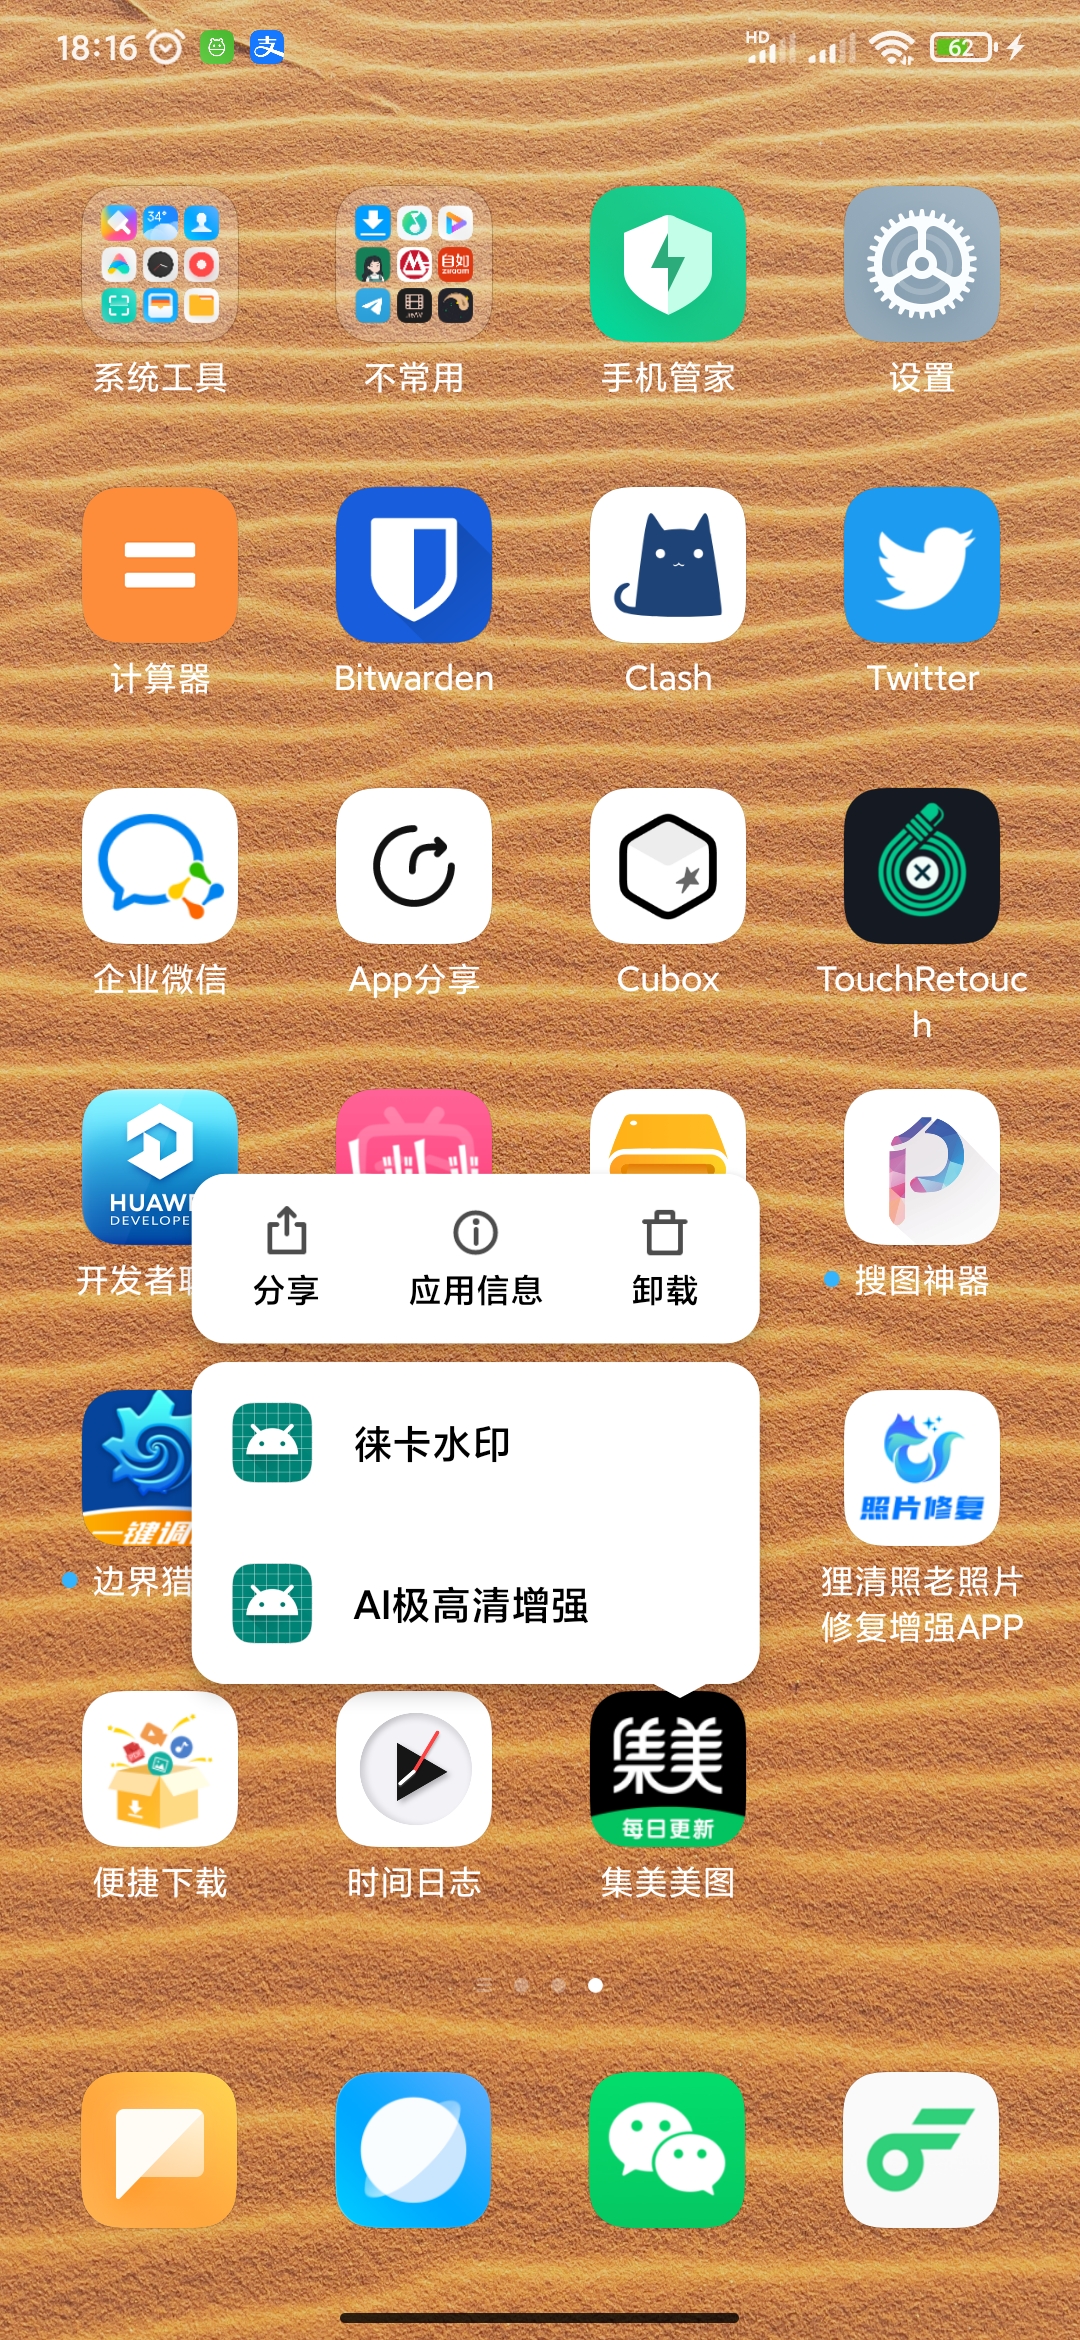 Quick Action in Flutter怎么设置icon？